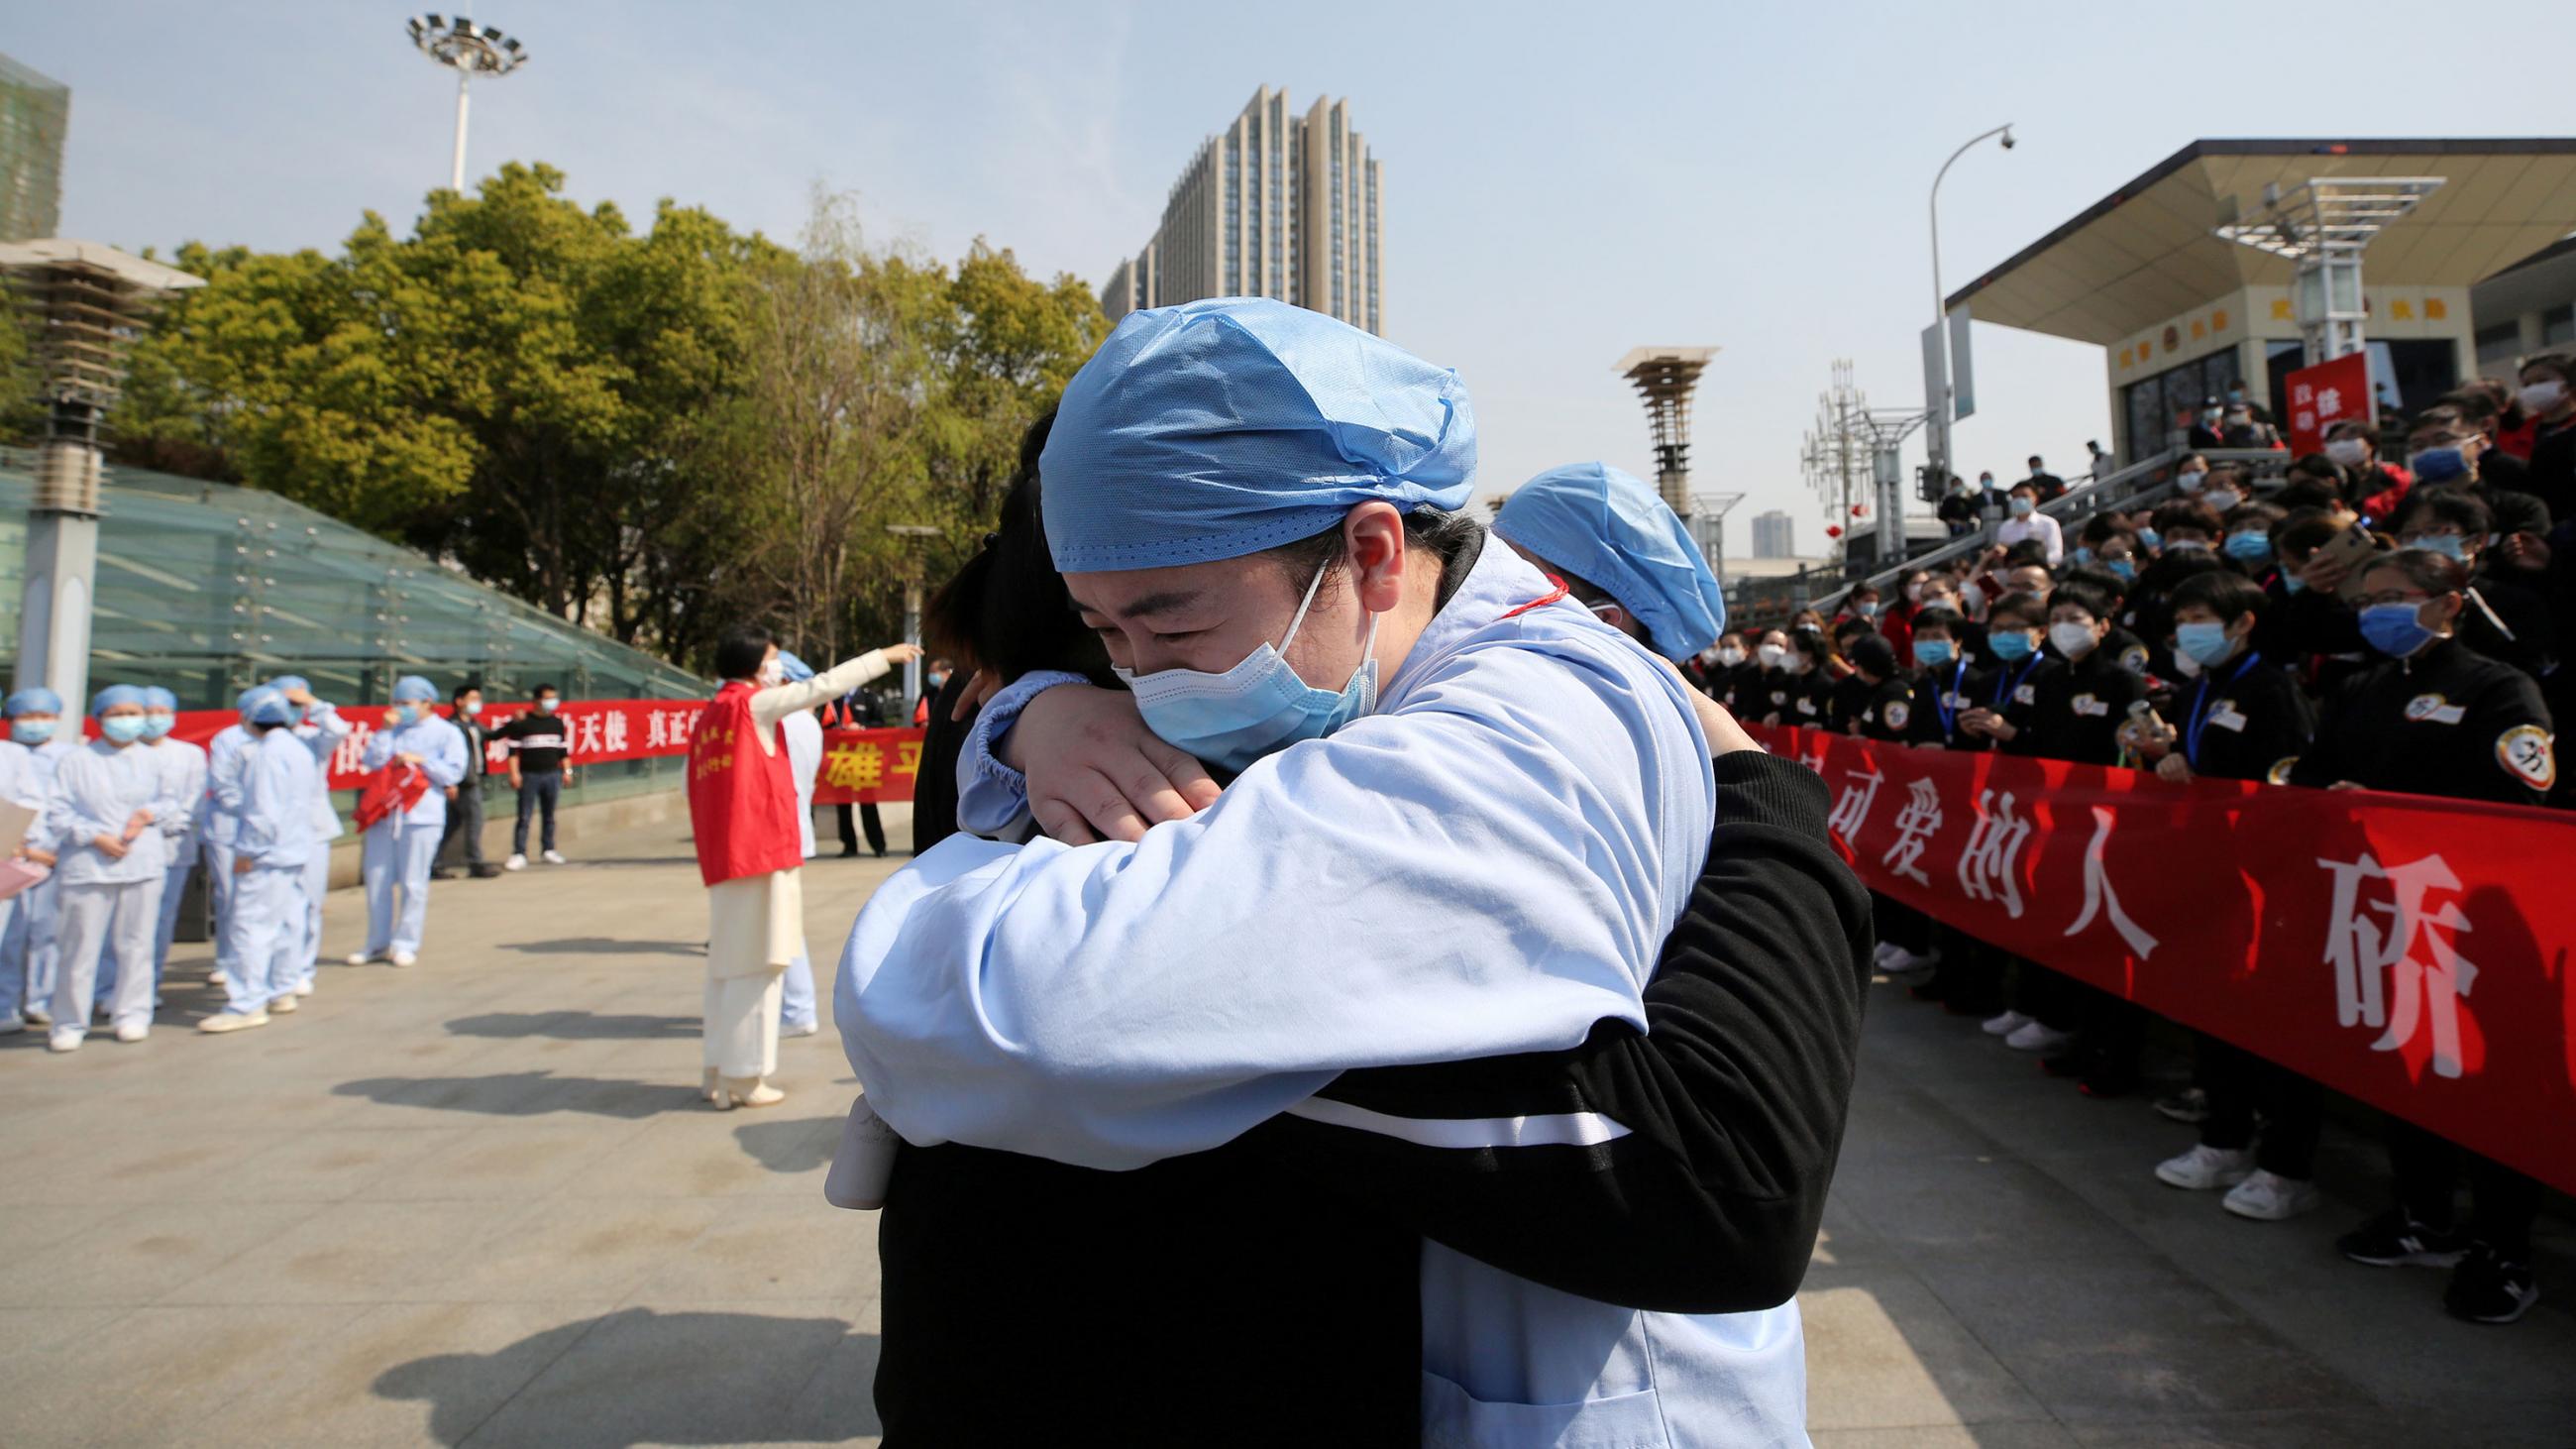  The photo shows two medical workers hugging in what is obviously an emotional scene. 